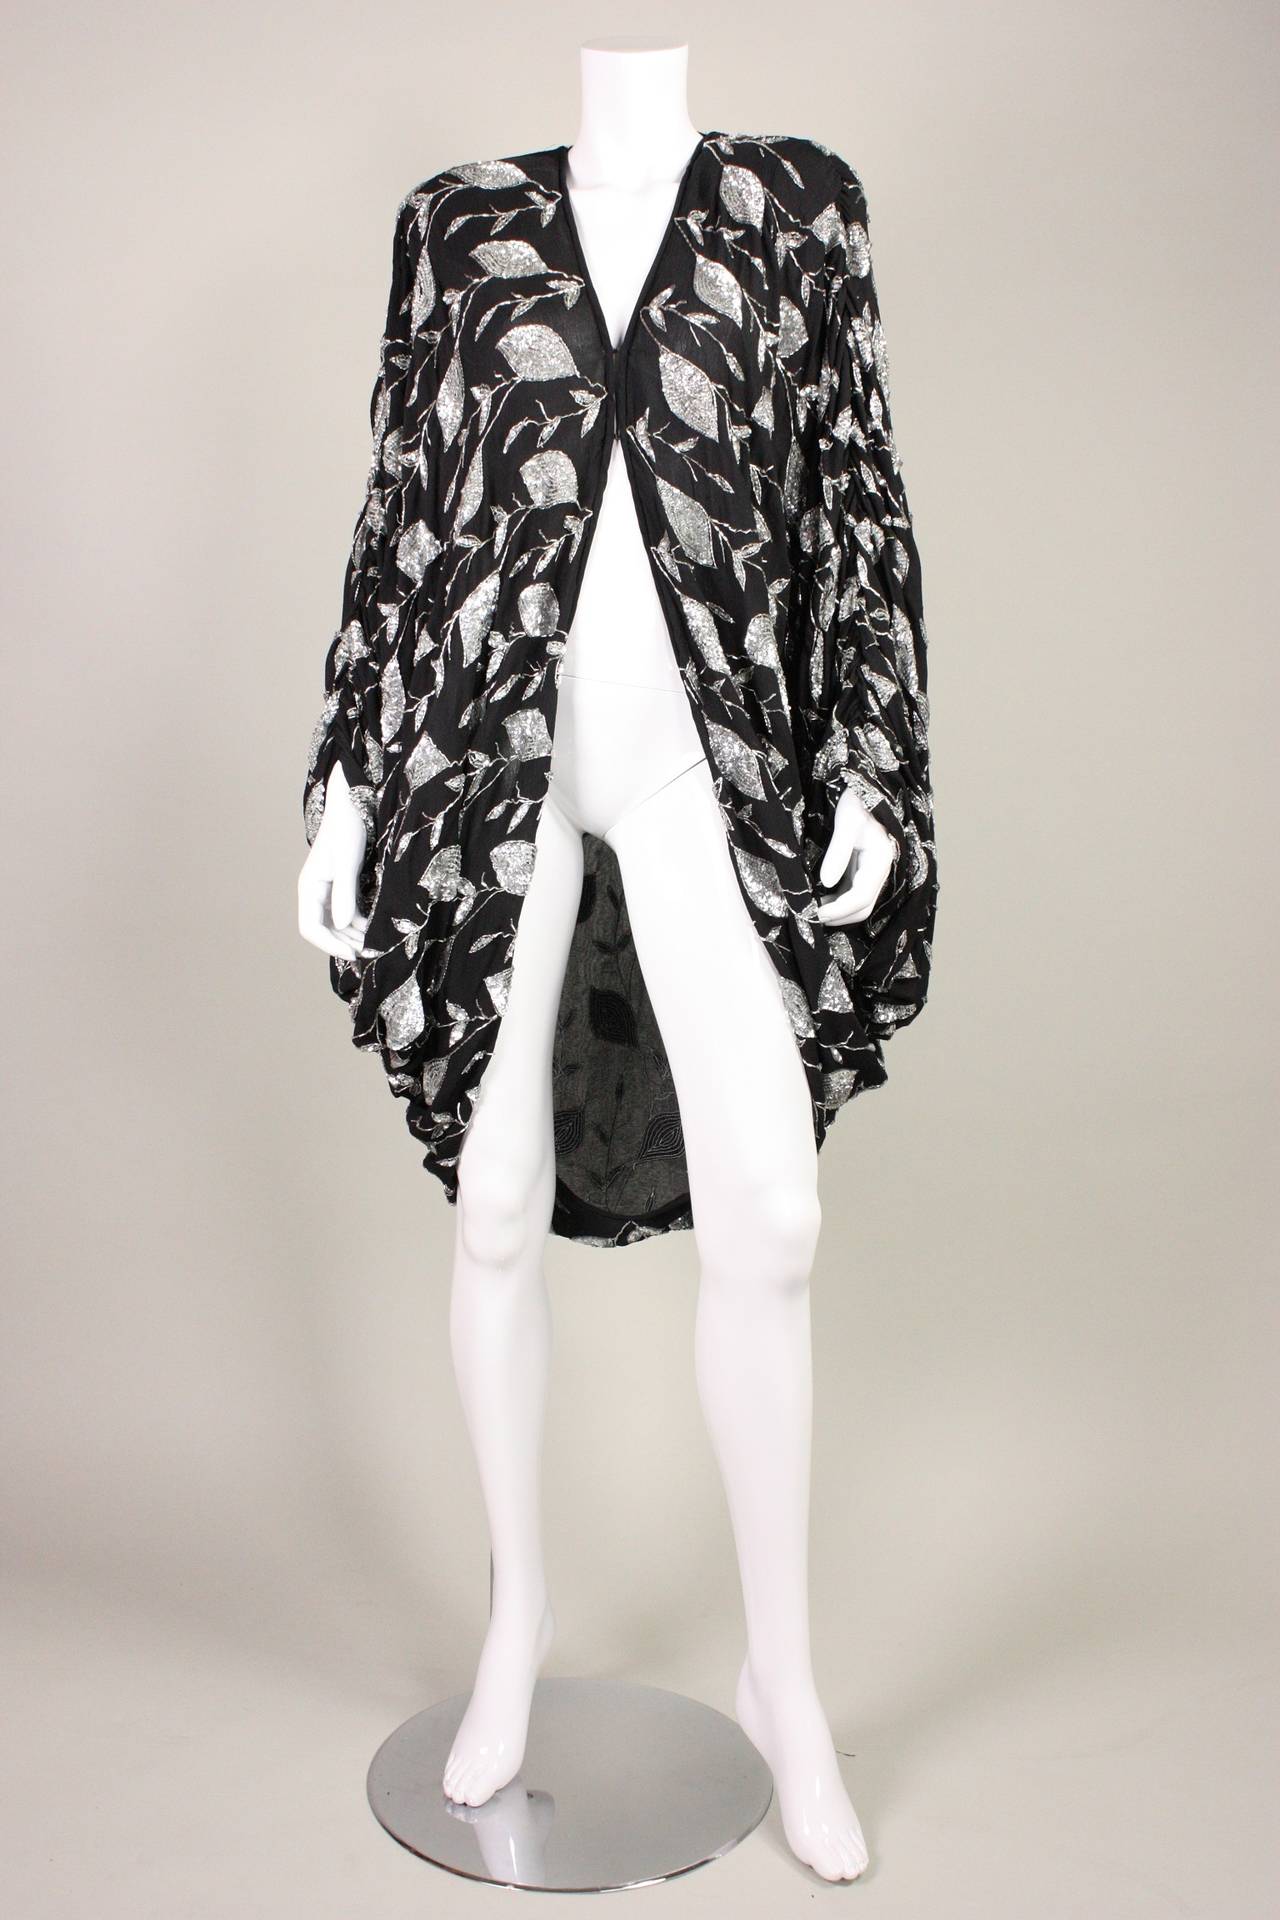 Vintage cocoon coat dates to the 1980's and is made of black chiffon that is adorned with silver sequins and beading in a leaf-like pattern.  Unlined.  Center front double hook and eye closure at bust.  Large shoulder pads.

No size label. 